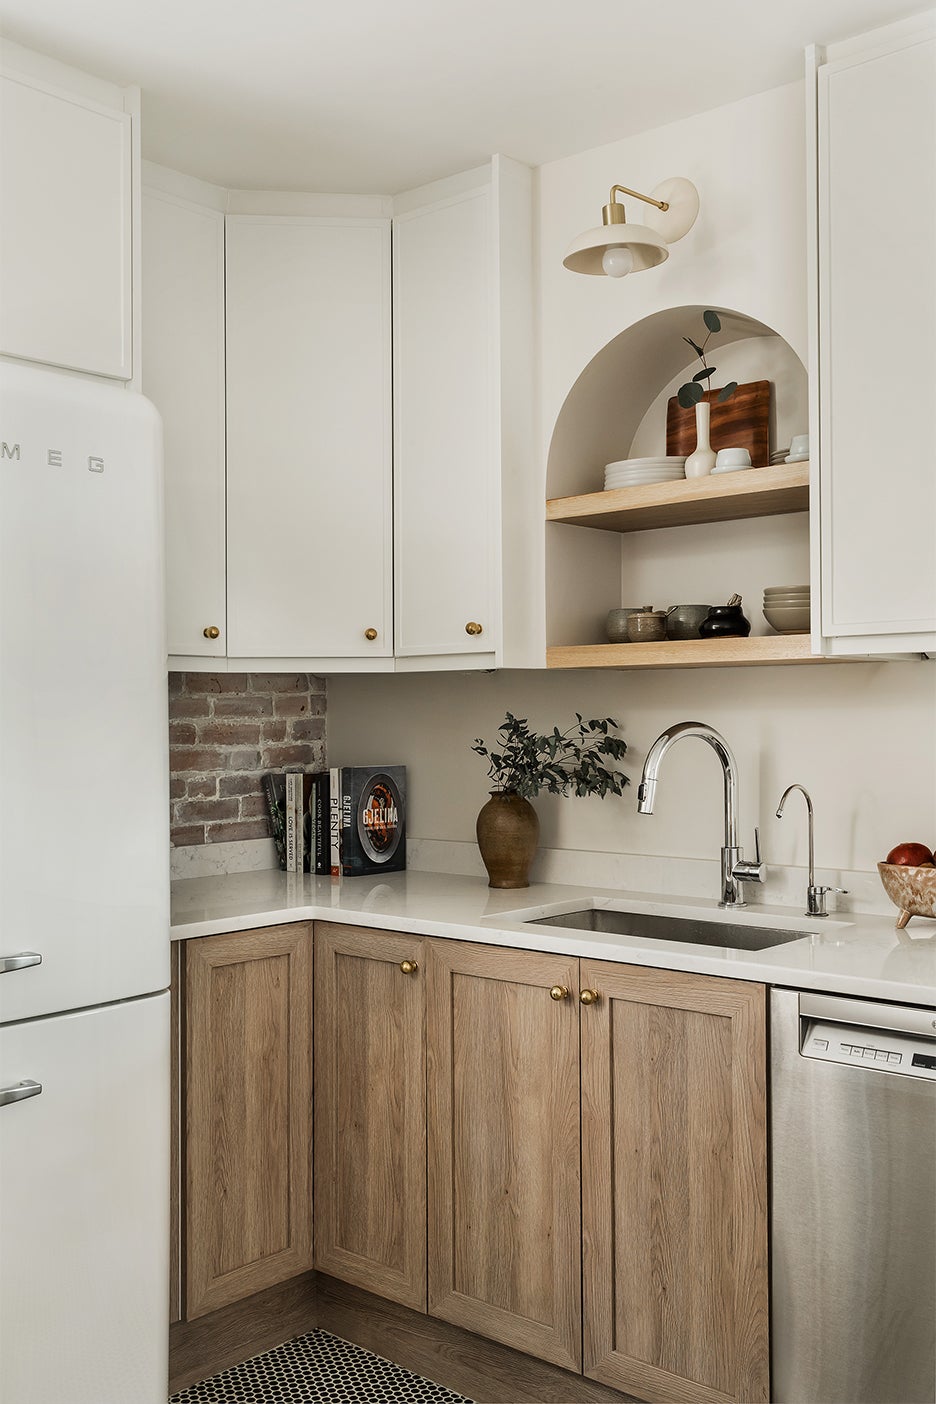 The Standard Kitchen Base Cabinet Height for Comfortable Cooking—And Resale